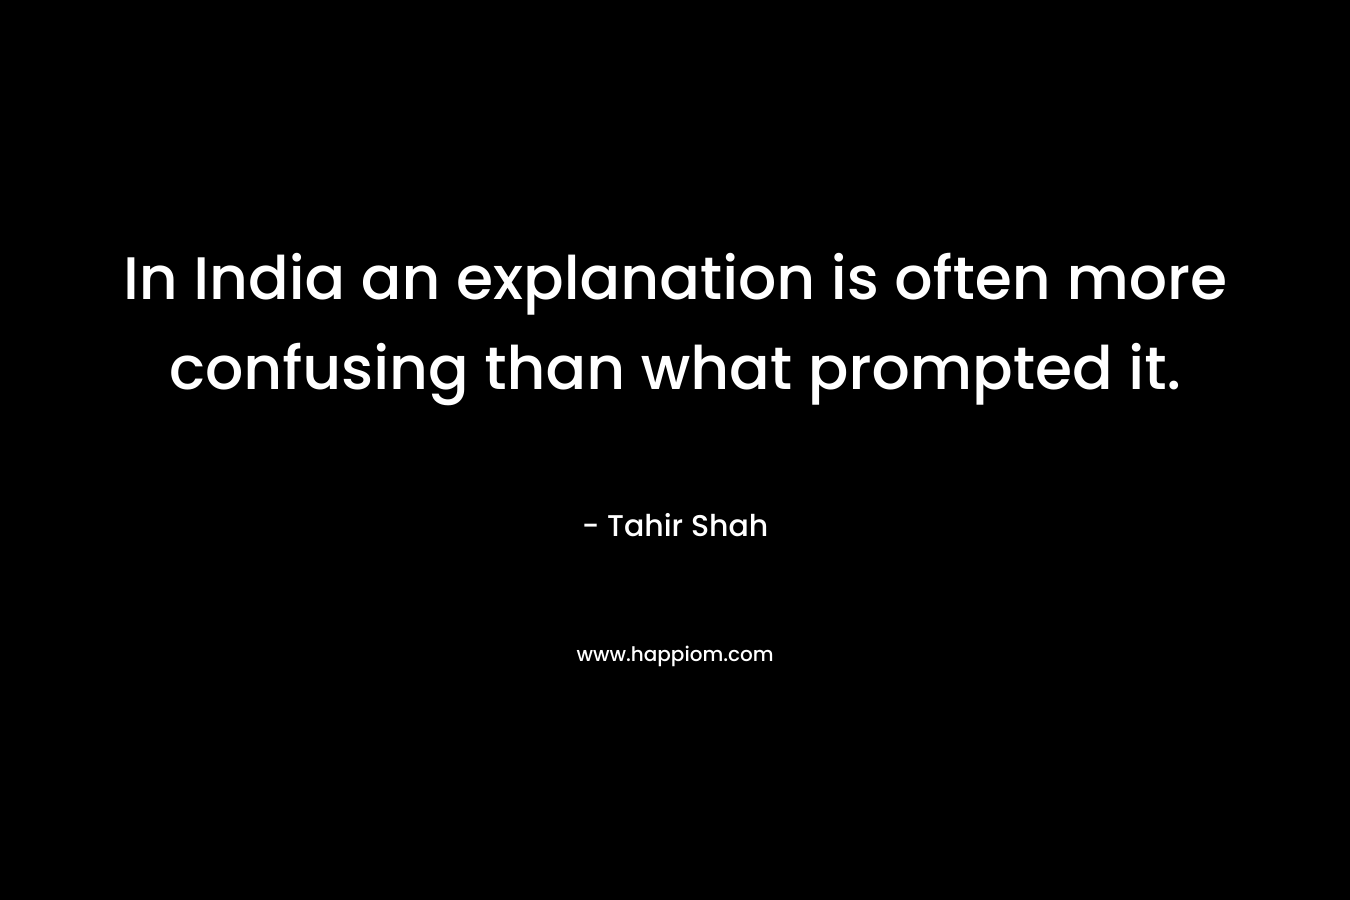 In India an explanation is often more confusing than what prompted it.